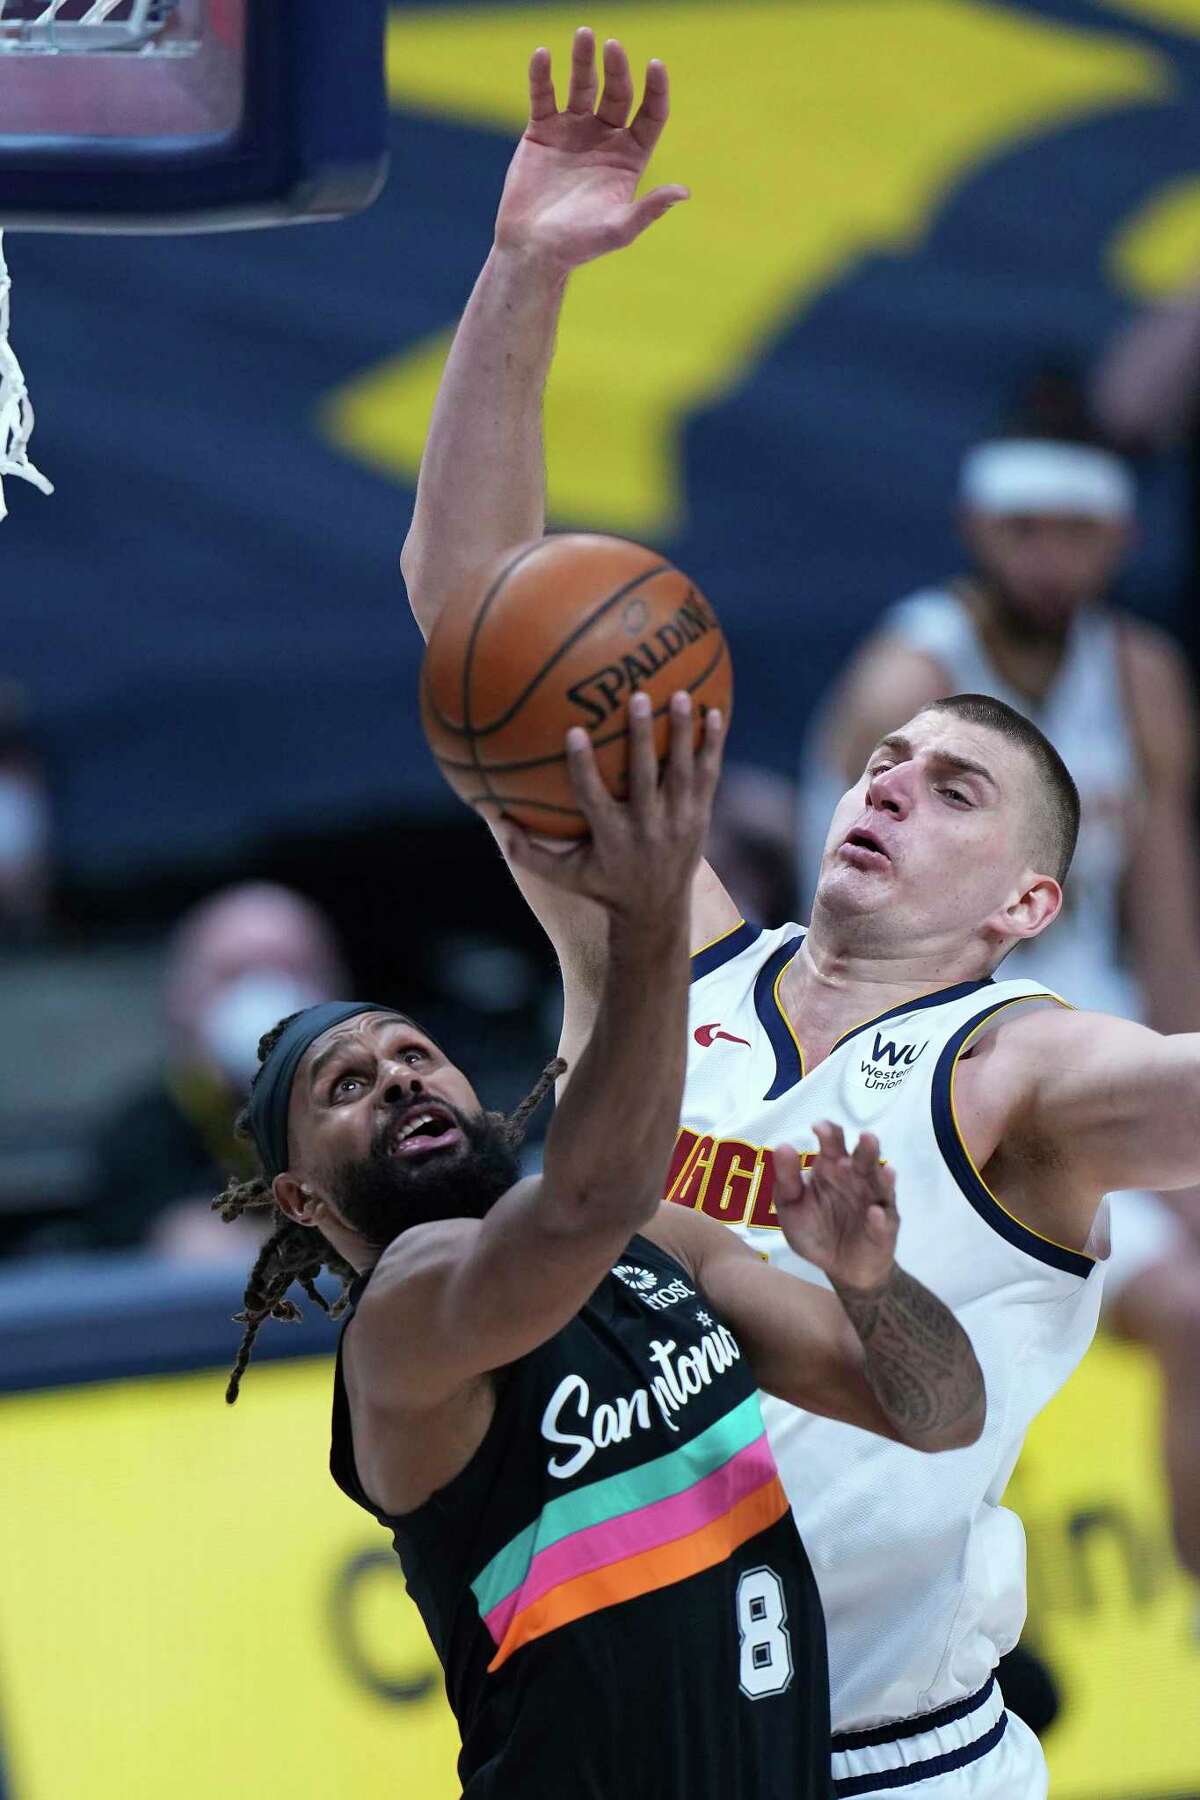 San Antonio Spurs guard Patty Mills (8) shoots against Denver Nuggets center Nikola Jokic during the first quarter of an NBA basketball game Wednesday, April 7, 2021, in Denver. (AP Photo/Jack Dempsey)